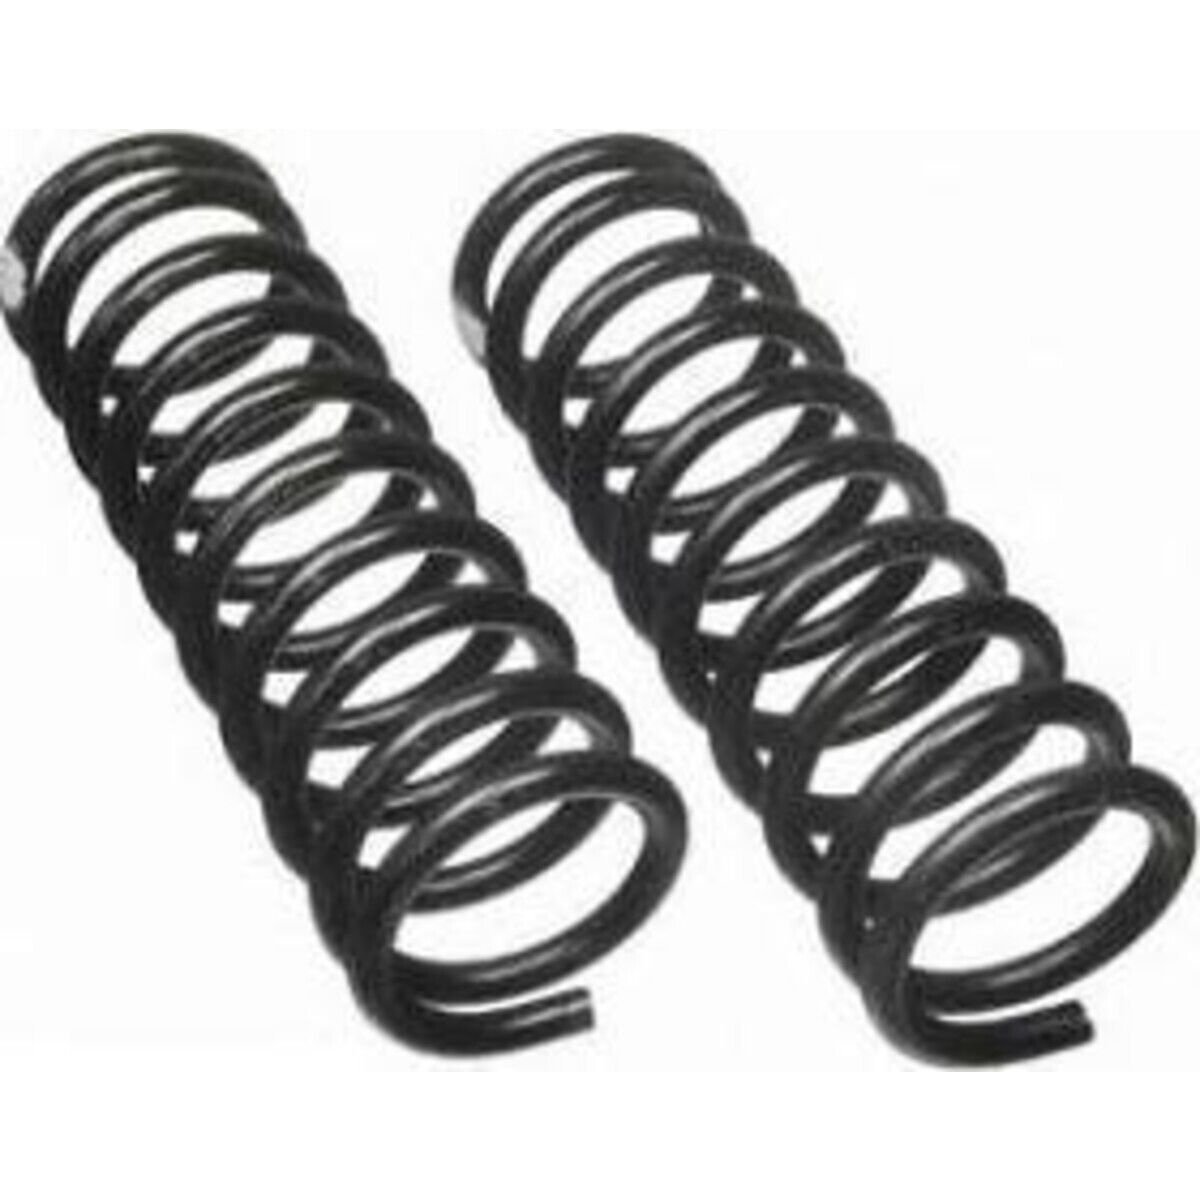 5610 Moog Coil Springs Set of 2 Front for Chevy Olds Cutlass Coupe Sedan Pair